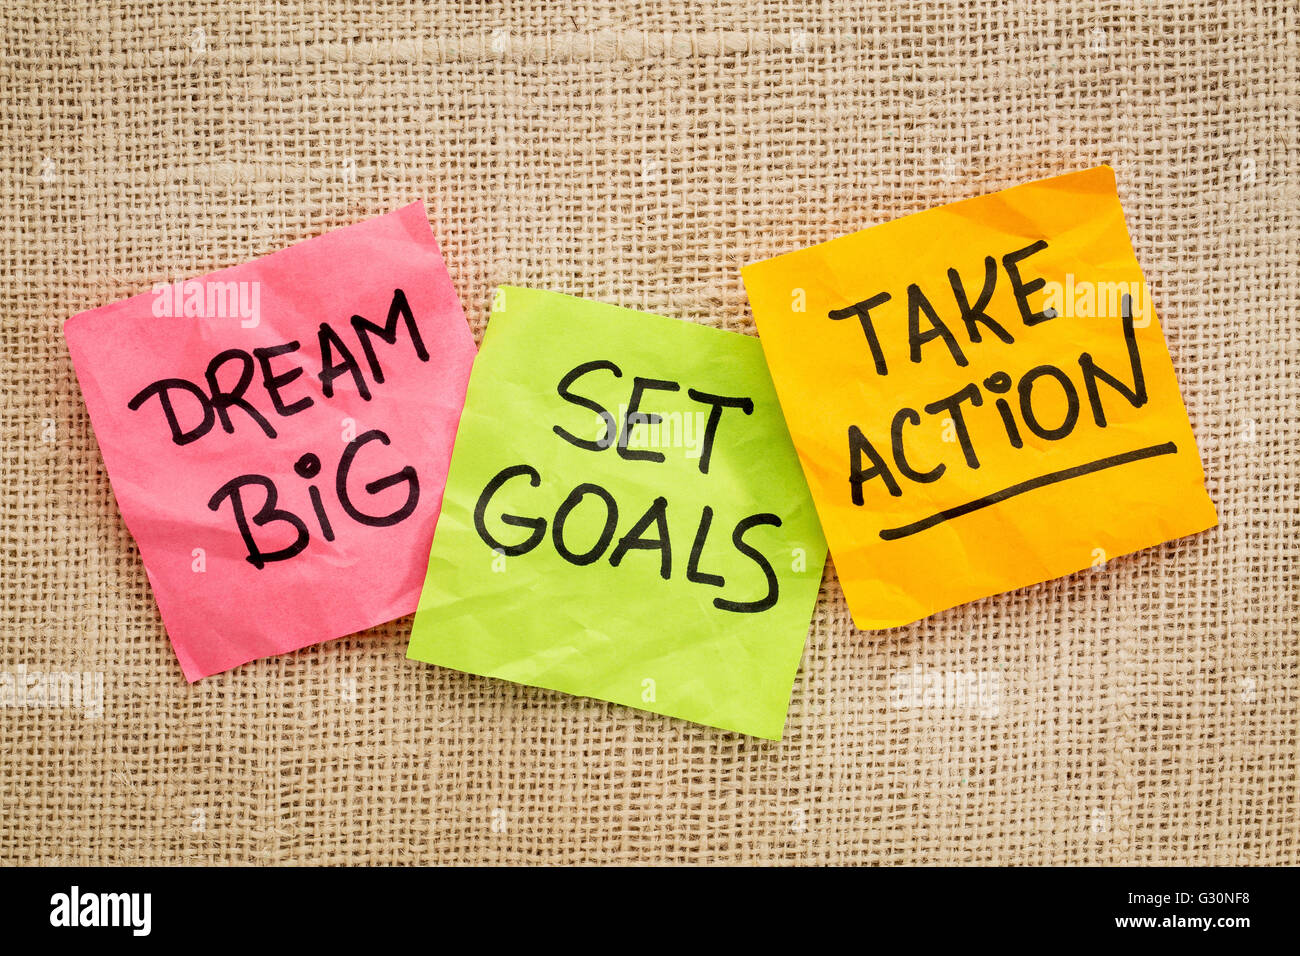 dream big, set goals, take action - motivational advice or reminder on sticky notes against canvas Stock Photo